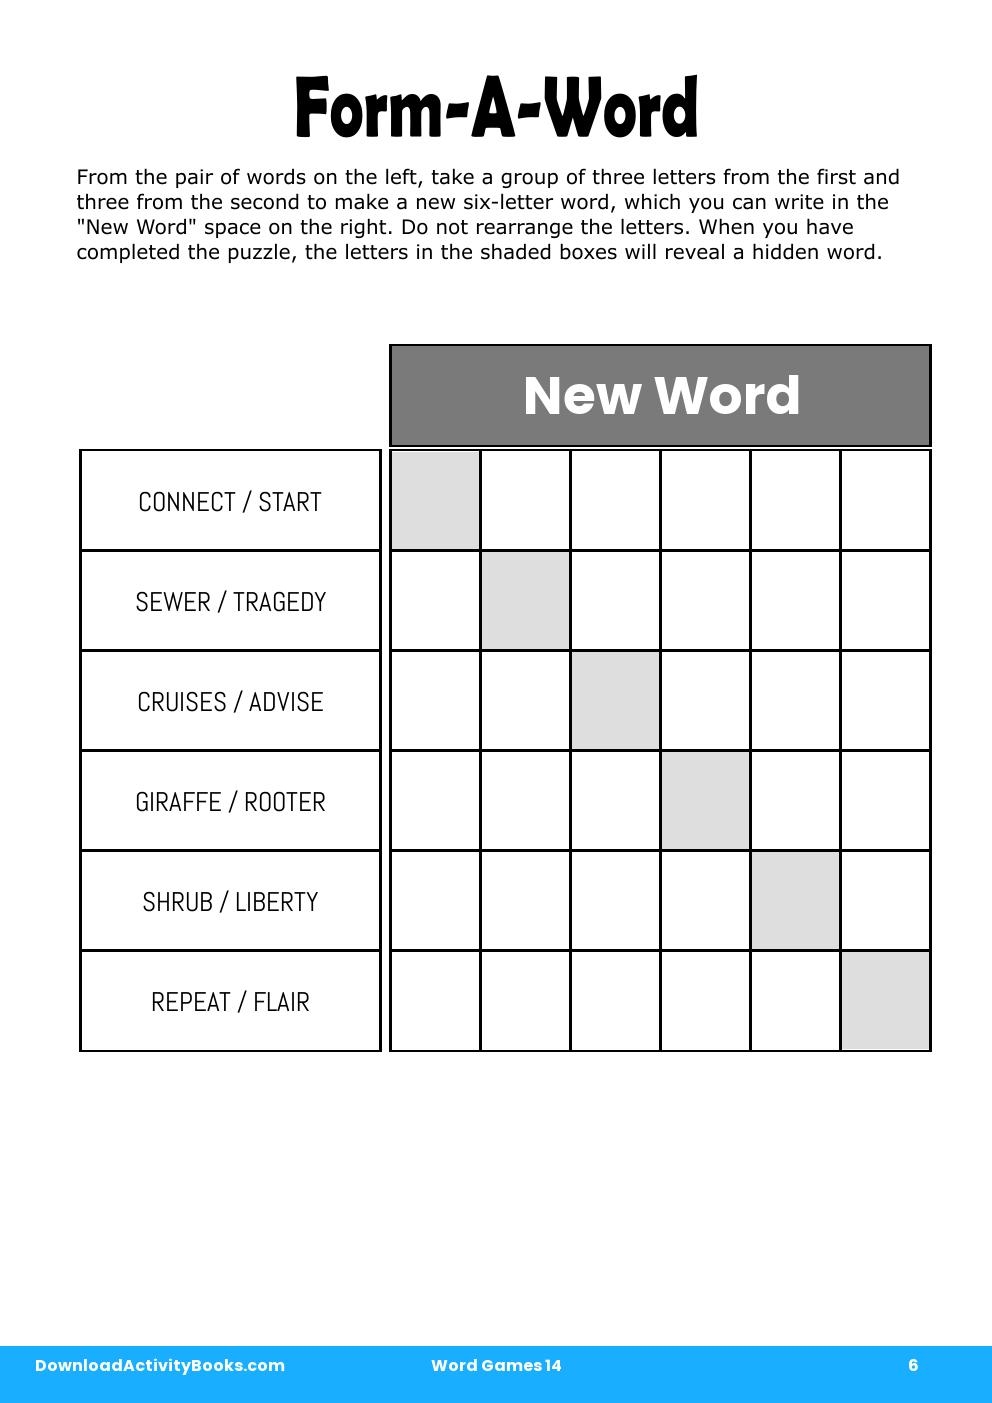 Form-A-Word in Word Games 14